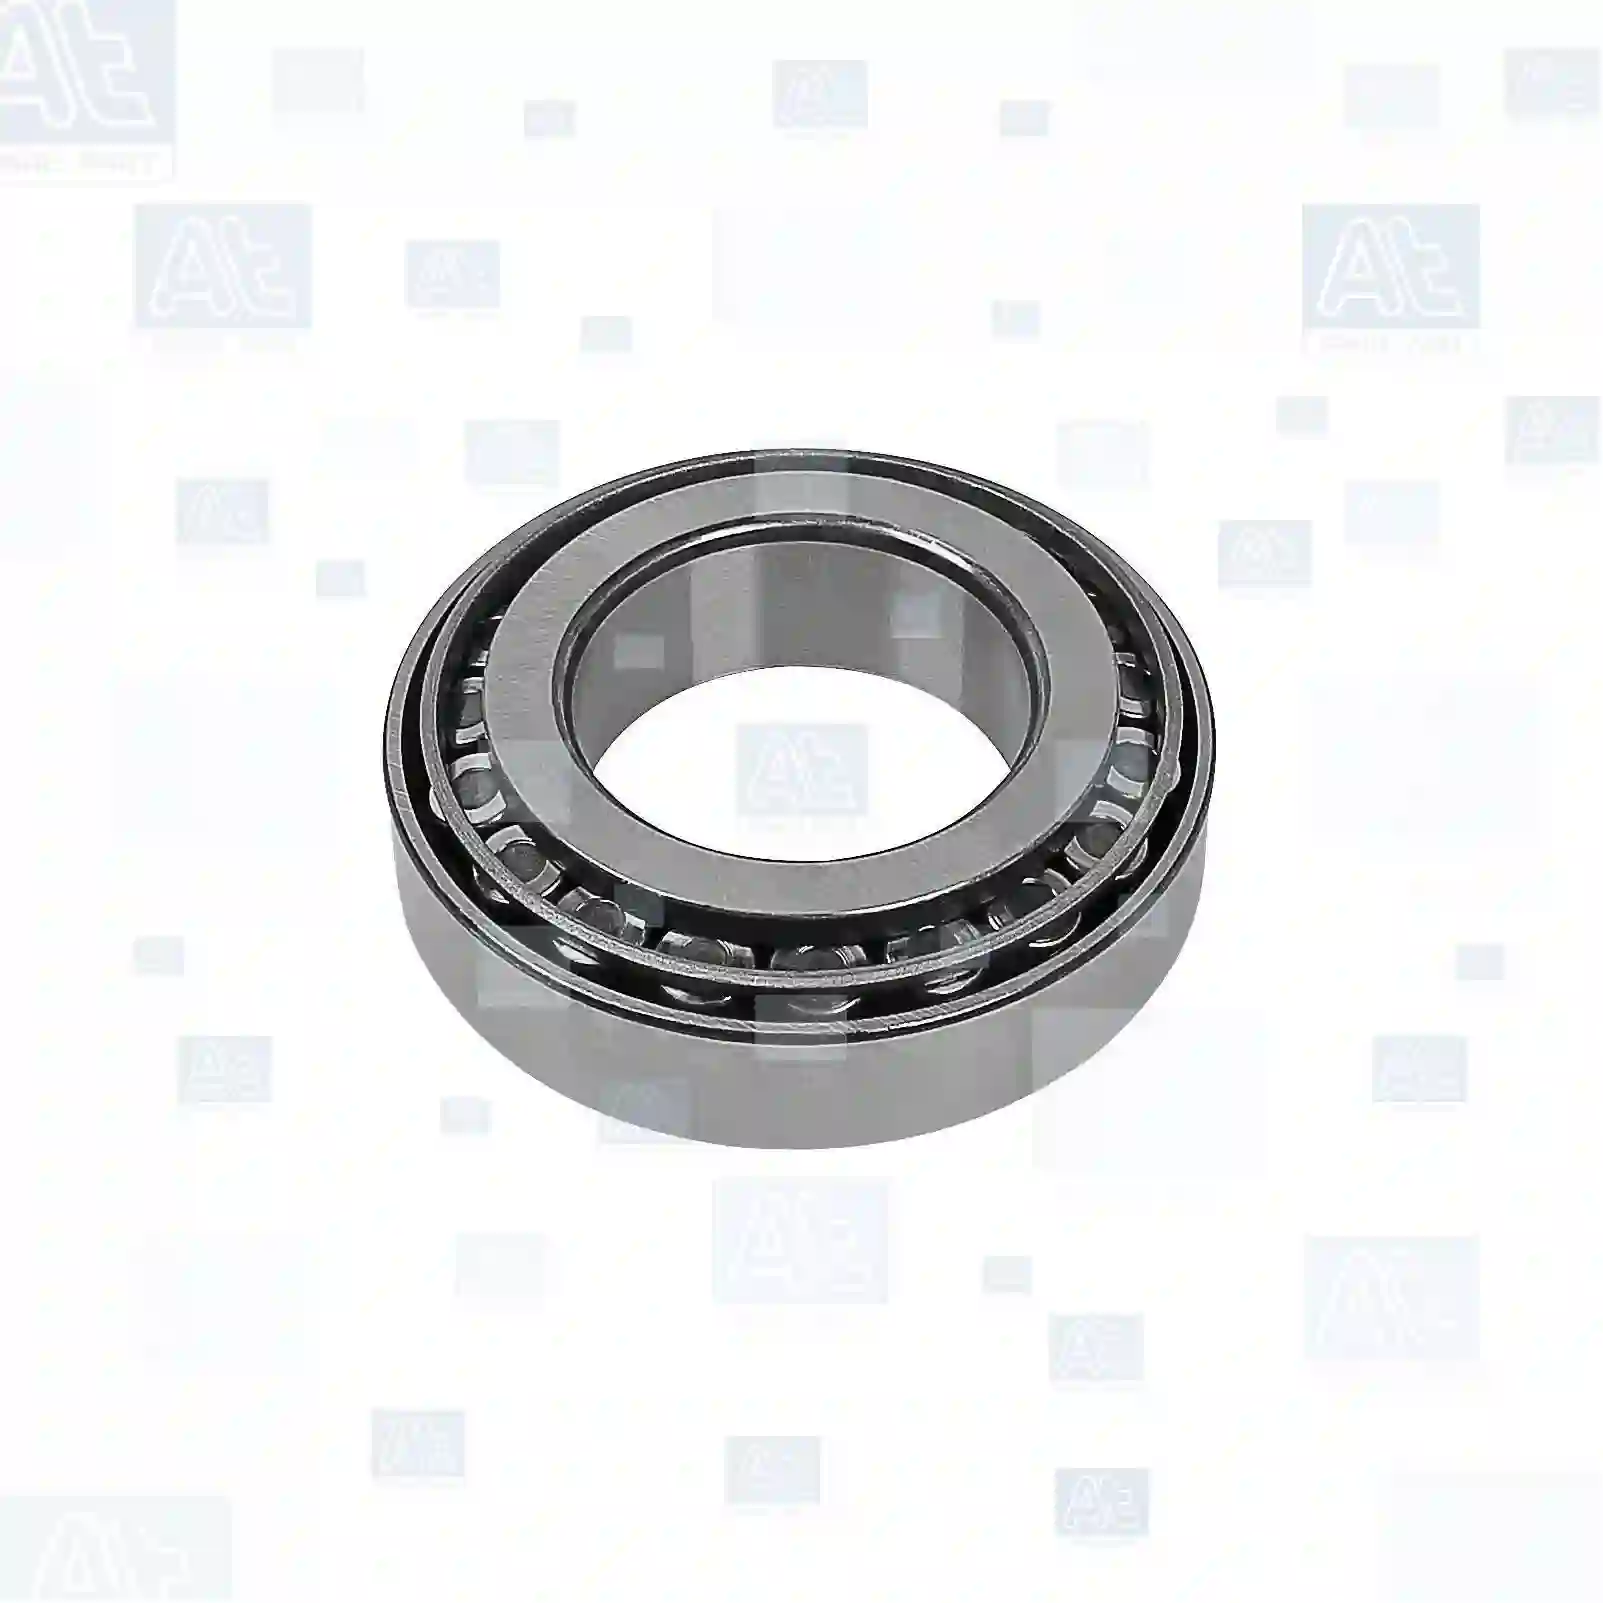 Tapered roller bearing, 77732452, 0264056000, 1602388, 26800180, 10500481, 10500481, 710500481, 01110005, 01125573, 1110005, 1125573, 26800180, 06324990002, 0019812405, 0159819605, 0159819705, 0169811705, 18312-99M91, 0023432873, 0773221200, 0959532212, 7421626061, 4200002900, 1305878, 11075, 1652099, 21626061 ||  77732452 At Spare Part | Engine, Accelerator Pedal, Camshaft, Connecting Rod, Crankcase, Crankshaft, Cylinder Head, Engine Suspension Mountings, Exhaust Manifold, Exhaust Gas Recirculation, Filter Kits, Flywheel Housing, General Overhaul Kits, Engine, Intake Manifold, Oil Cleaner, Oil Cooler, Oil Filter, Oil Pump, Oil Sump, Piston & Liner, Sensor & Switch, Timing Case, Turbocharger, Cooling System, Belt Tensioner, Coolant Filter, Coolant Pipe, Corrosion Prevention Agent, Drive, Expansion Tank, Fan, Intercooler, Monitors & Gauges, Radiator, Thermostat, V-Belt / Timing belt, Water Pump, Fuel System, Electronical Injector Unit, Feed Pump, Fuel Filter, cpl., Fuel Gauge Sender,  Fuel Line, Fuel Pump, Fuel Tank, Injection Line Kit, Injection Pump, Exhaust System, Clutch & Pedal, Gearbox, Propeller Shaft, Axles, Brake System, Hubs & Wheels, Suspension, Leaf Spring, Universal Parts / Accessories, Steering, Electrical System, Cabin Tapered roller bearing, 77732452, 0264056000, 1602388, 26800180, 10500481, 10500481, 710500481, 01110005, 01125573, 1110005, 1125573, 26800180, 06324990002, 0019812405, 0159819605, 0159819705, 0169811705, 18312-99M91, 0023432873, 0773221200, 0959532212, 7421626061, 4200002900, 1305878, 11075, 1652099, 21626061 ||  77732452 At Spare Part | Engine, Accelerator Pedal, Camshaft, Connecting Rod, Crankcase, Crankshaft, Cylinder Head, Engine Suspension Mountings, Exhaust Manifold, Exhaust Gas Recirculation, Filter Kits, Flywheel Housing, General Overhaul Kits, Engine, Intake Manifold, Oil Cleaner, Oil Cooler, Oil Filter, Oil Pump, Oil Sump, Piston & Liner, Sensor & Switch, Timing Case, Turbocharger, Cooling System, Belt Tensioner, Coolant Filter, Coolant Pipe, Corrosion Prevention Agent, Drive, Expansion Tank, Fan, Intercooler, Monitors & Gauges, Radiator, Thermostat, V-Belt / Timing belt, Water Pump, Fuel System, Electronical Injector Unit, Feed Pump, Fuel Filter, cpl., Fuel Gauge Sender,  Fuel Line, Fuel Pump, Fuel Tank, Injection Line Kit, Injection Pump, Exhaust System, Clutch & Pedal, Gearbox, Propeller Shaft, Axles, Brake System, Hubs & Wheels, Suspension, Leaf Spring, Universal Parts / Accessories, Steering, Electrical System, Cabin